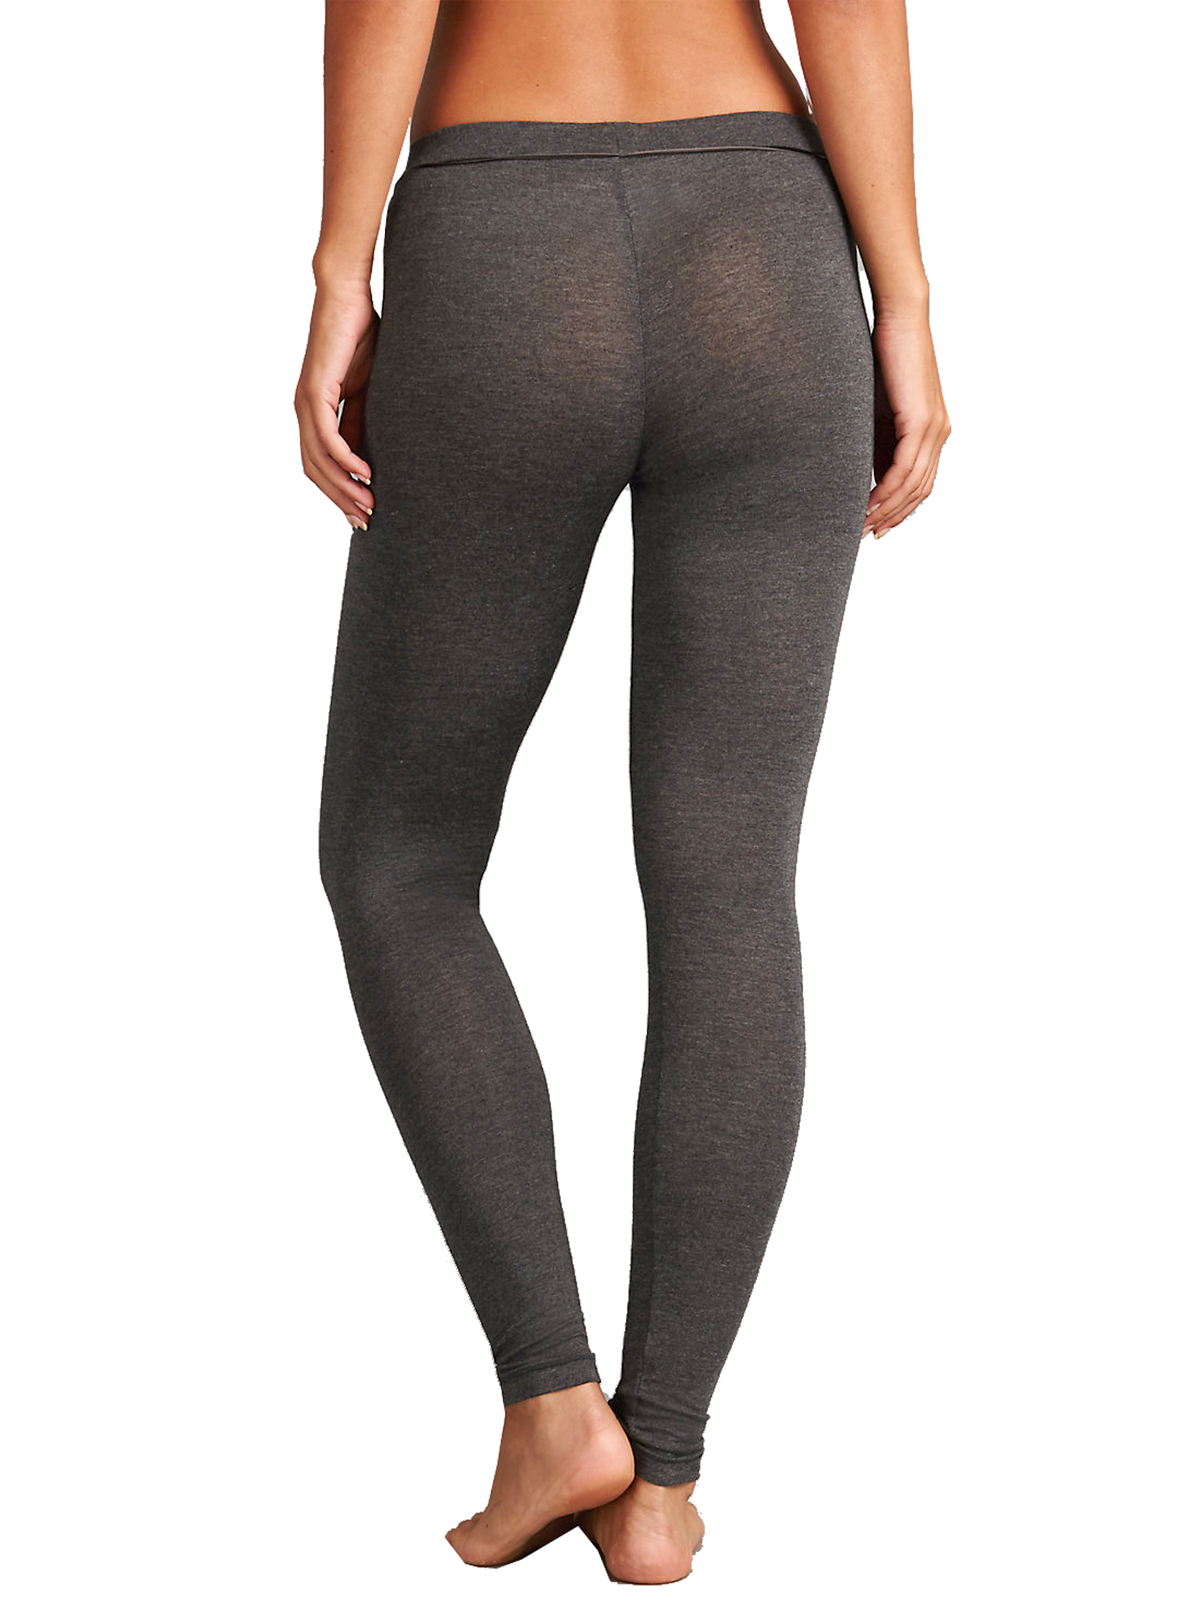 M&S Womens Heatgen Plus Thermal Brushed Leggings 14 Black - Compare Prices  & Where To Buy 